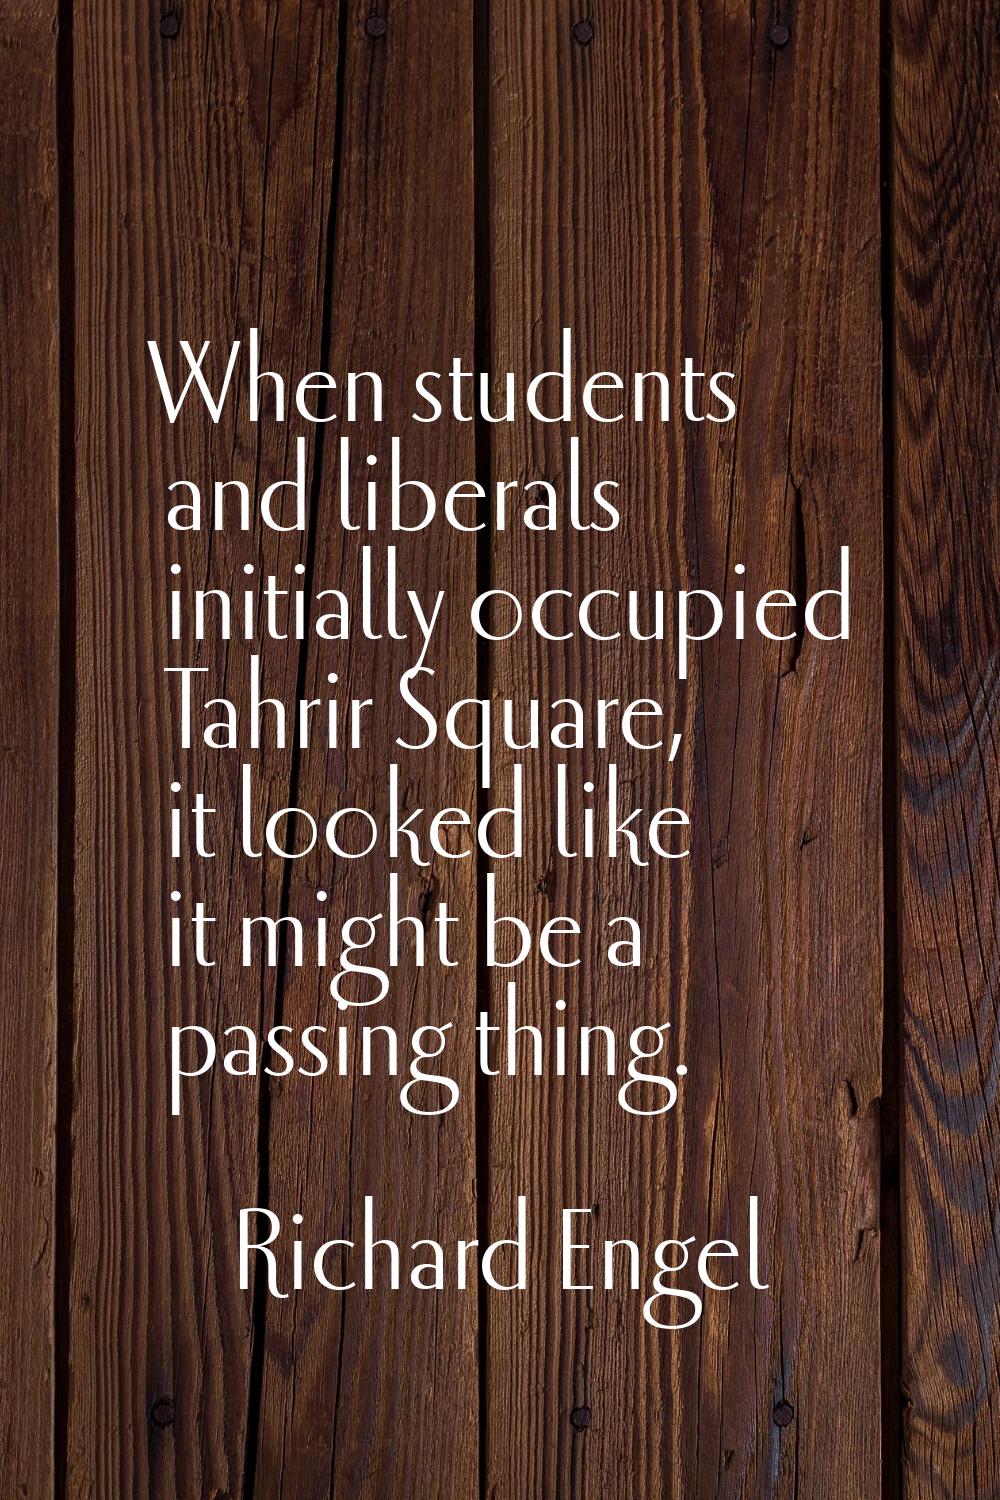 When students and liberals initially occupied Tahrir Square, it looked like it might be a passing t